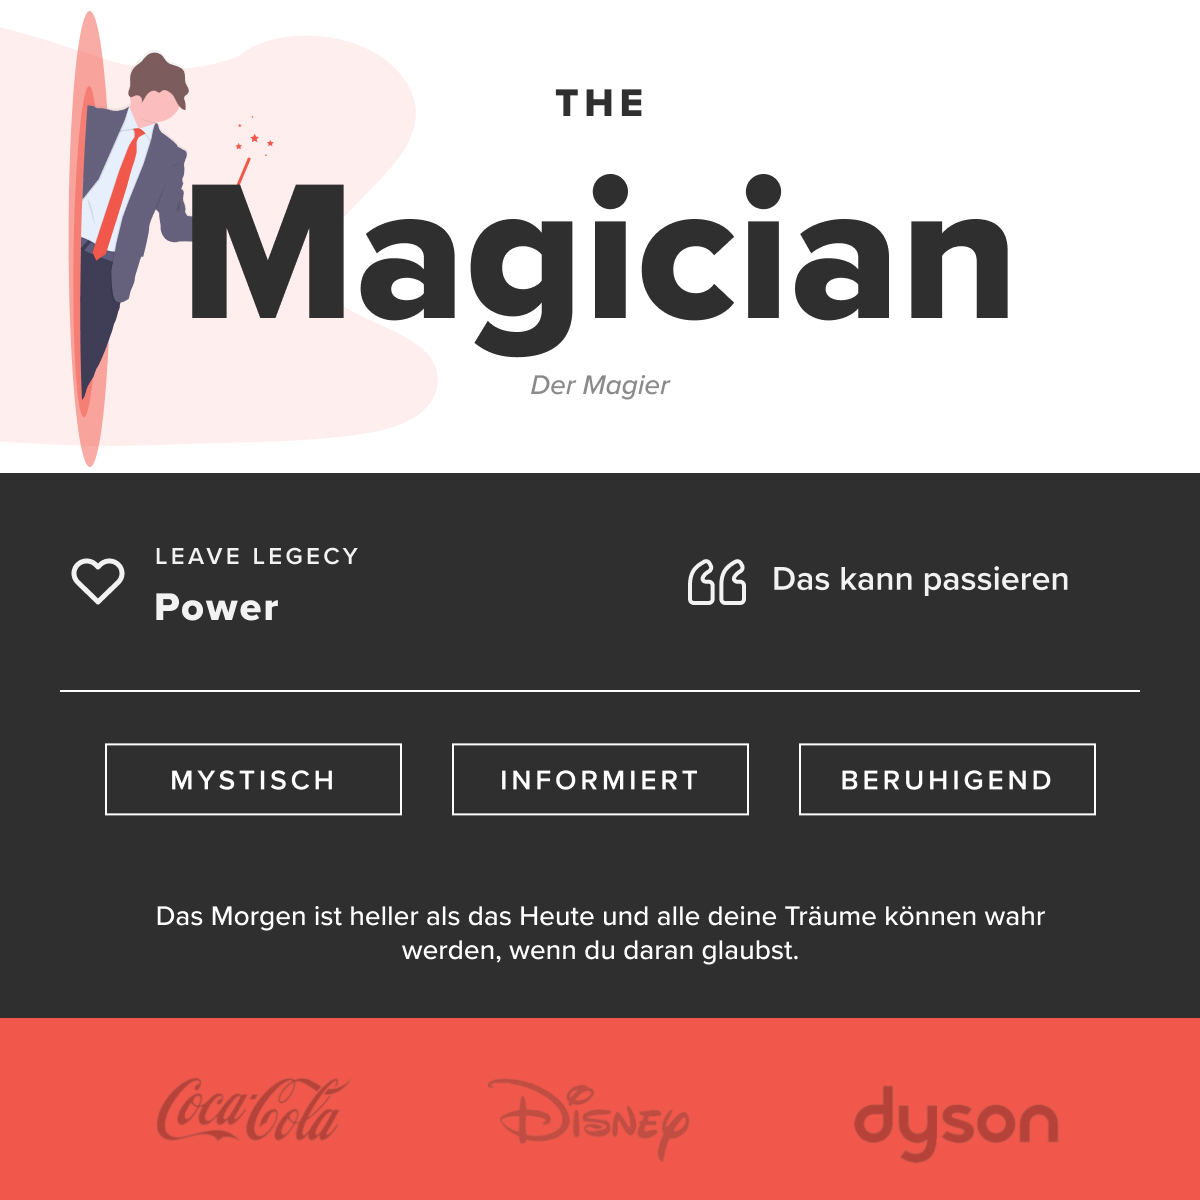 The magician is a wordpress theme with an image of a man on a surfboard.